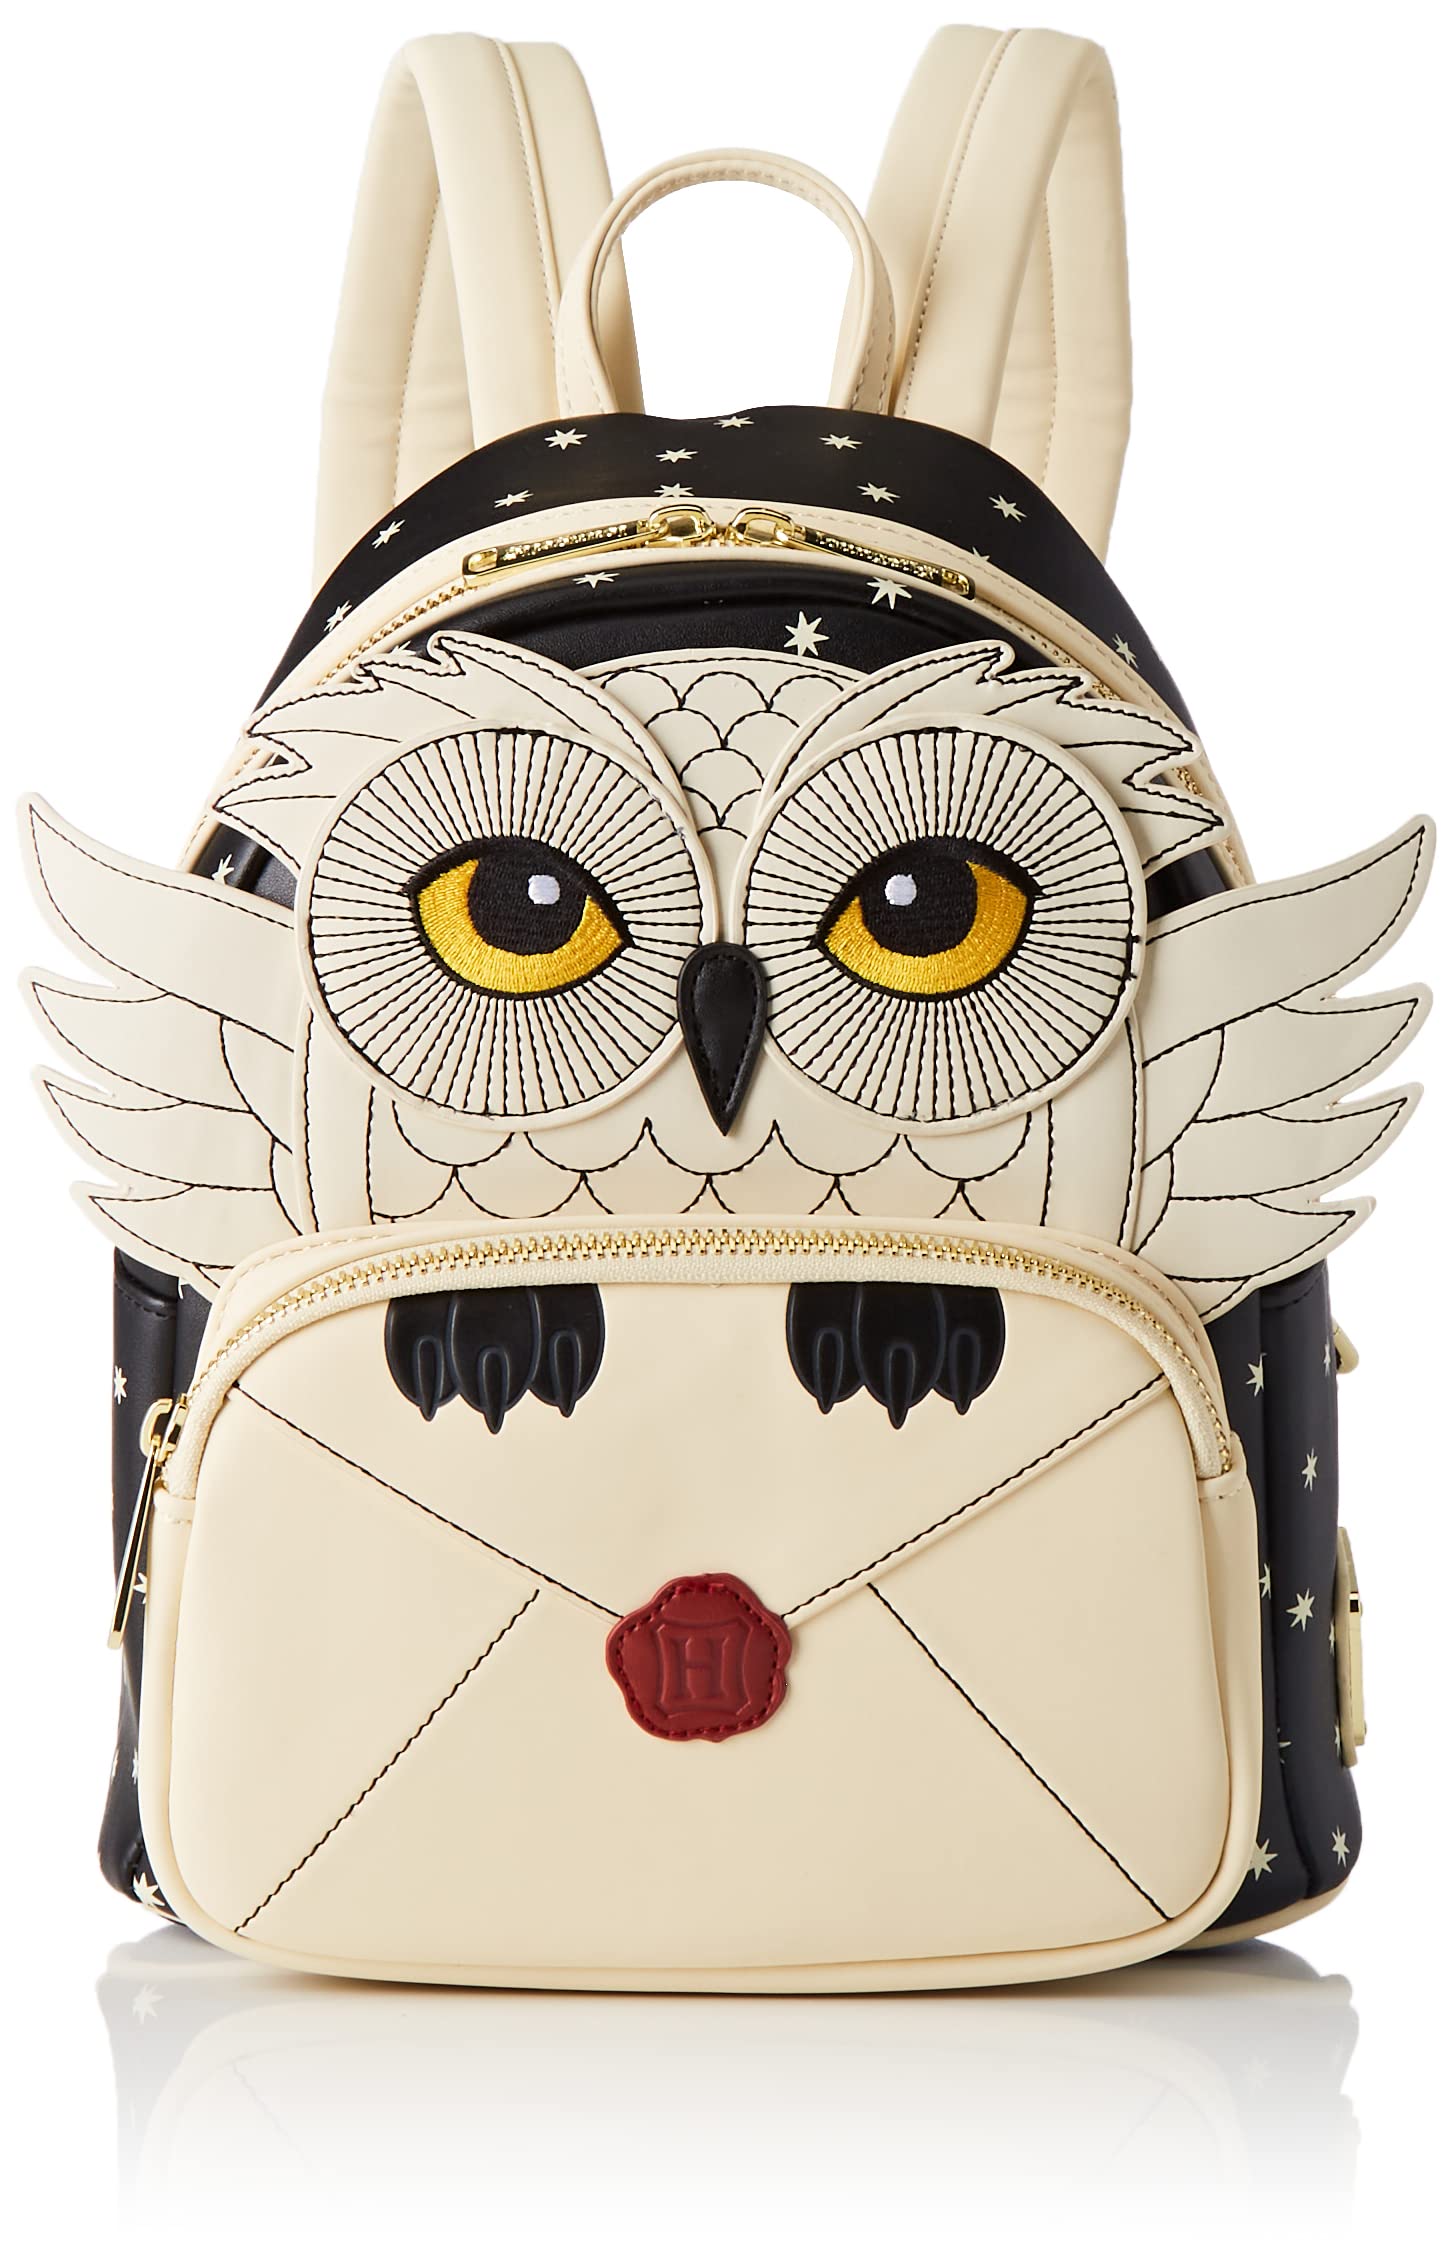 Loungefly Harry Potter Hedwig Howler Womens Double Strap Shoulder Bag Purse